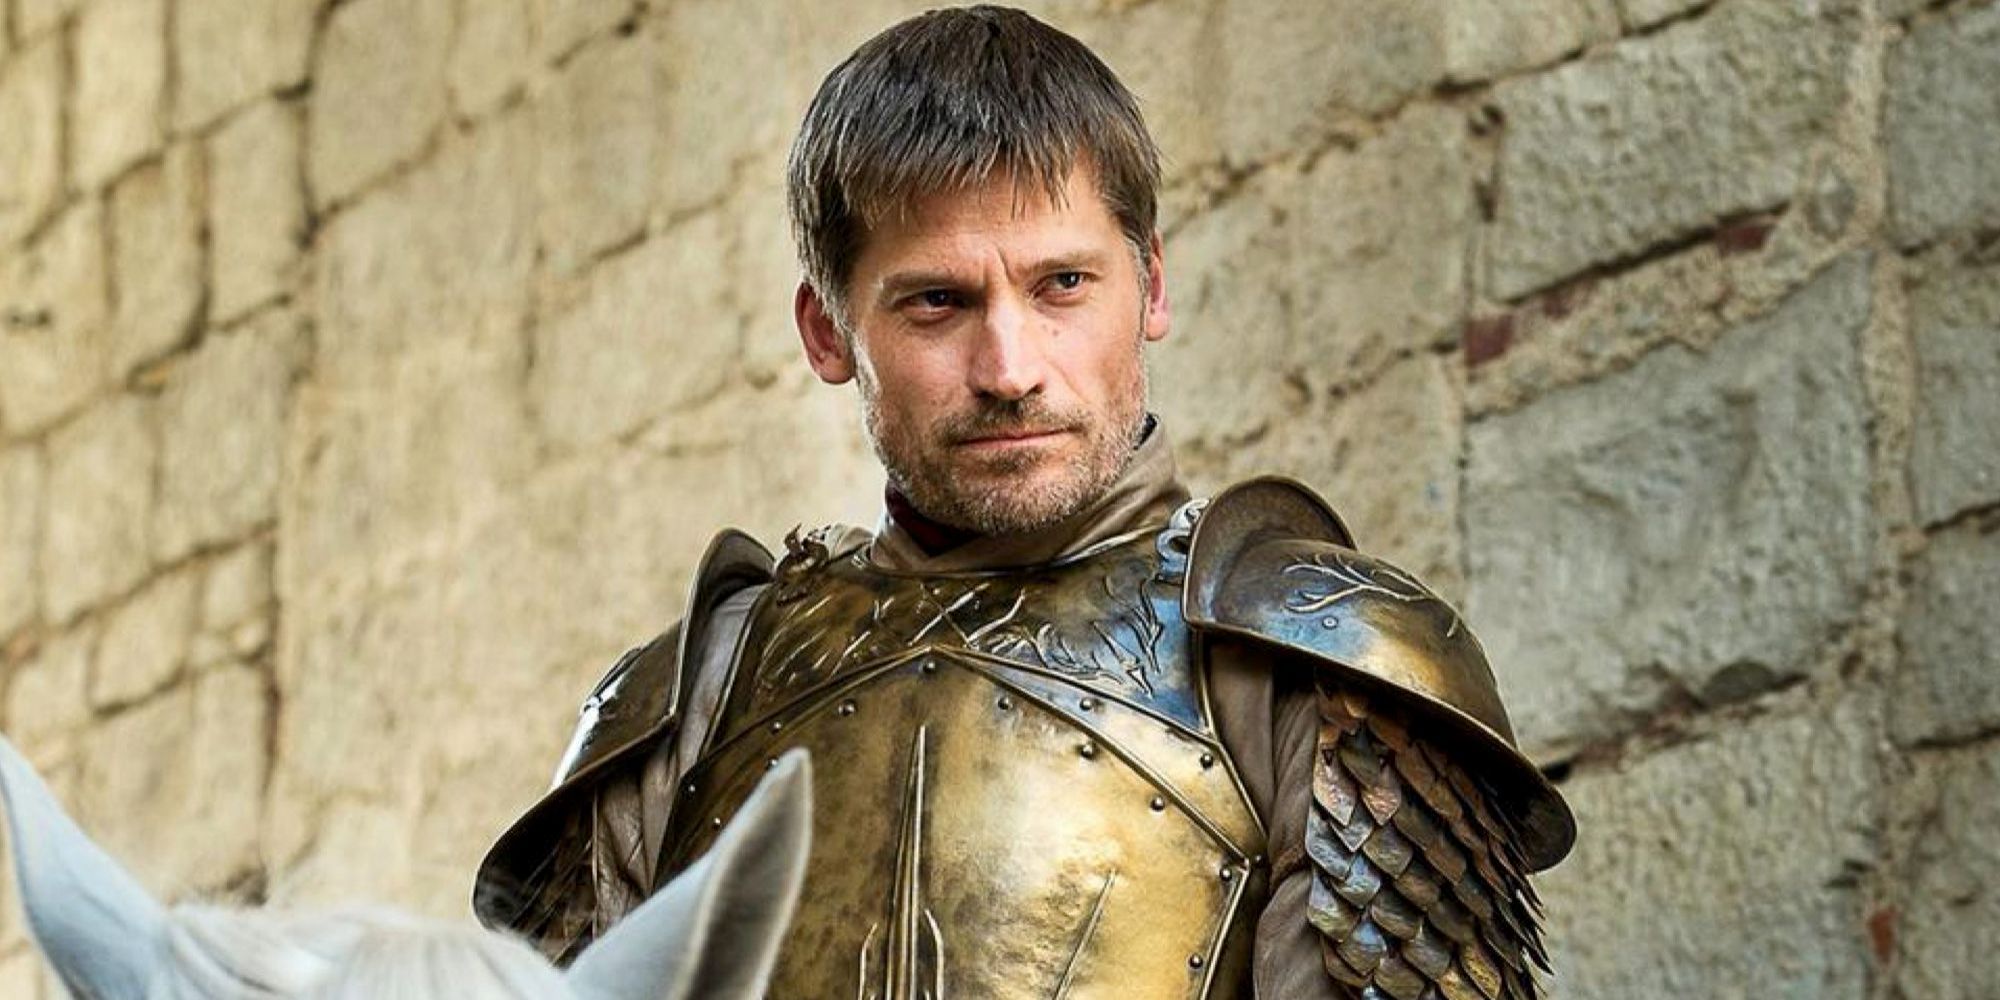 Jamie Lannister in Kingsguard armor riding a horse in the streets of King's Landing